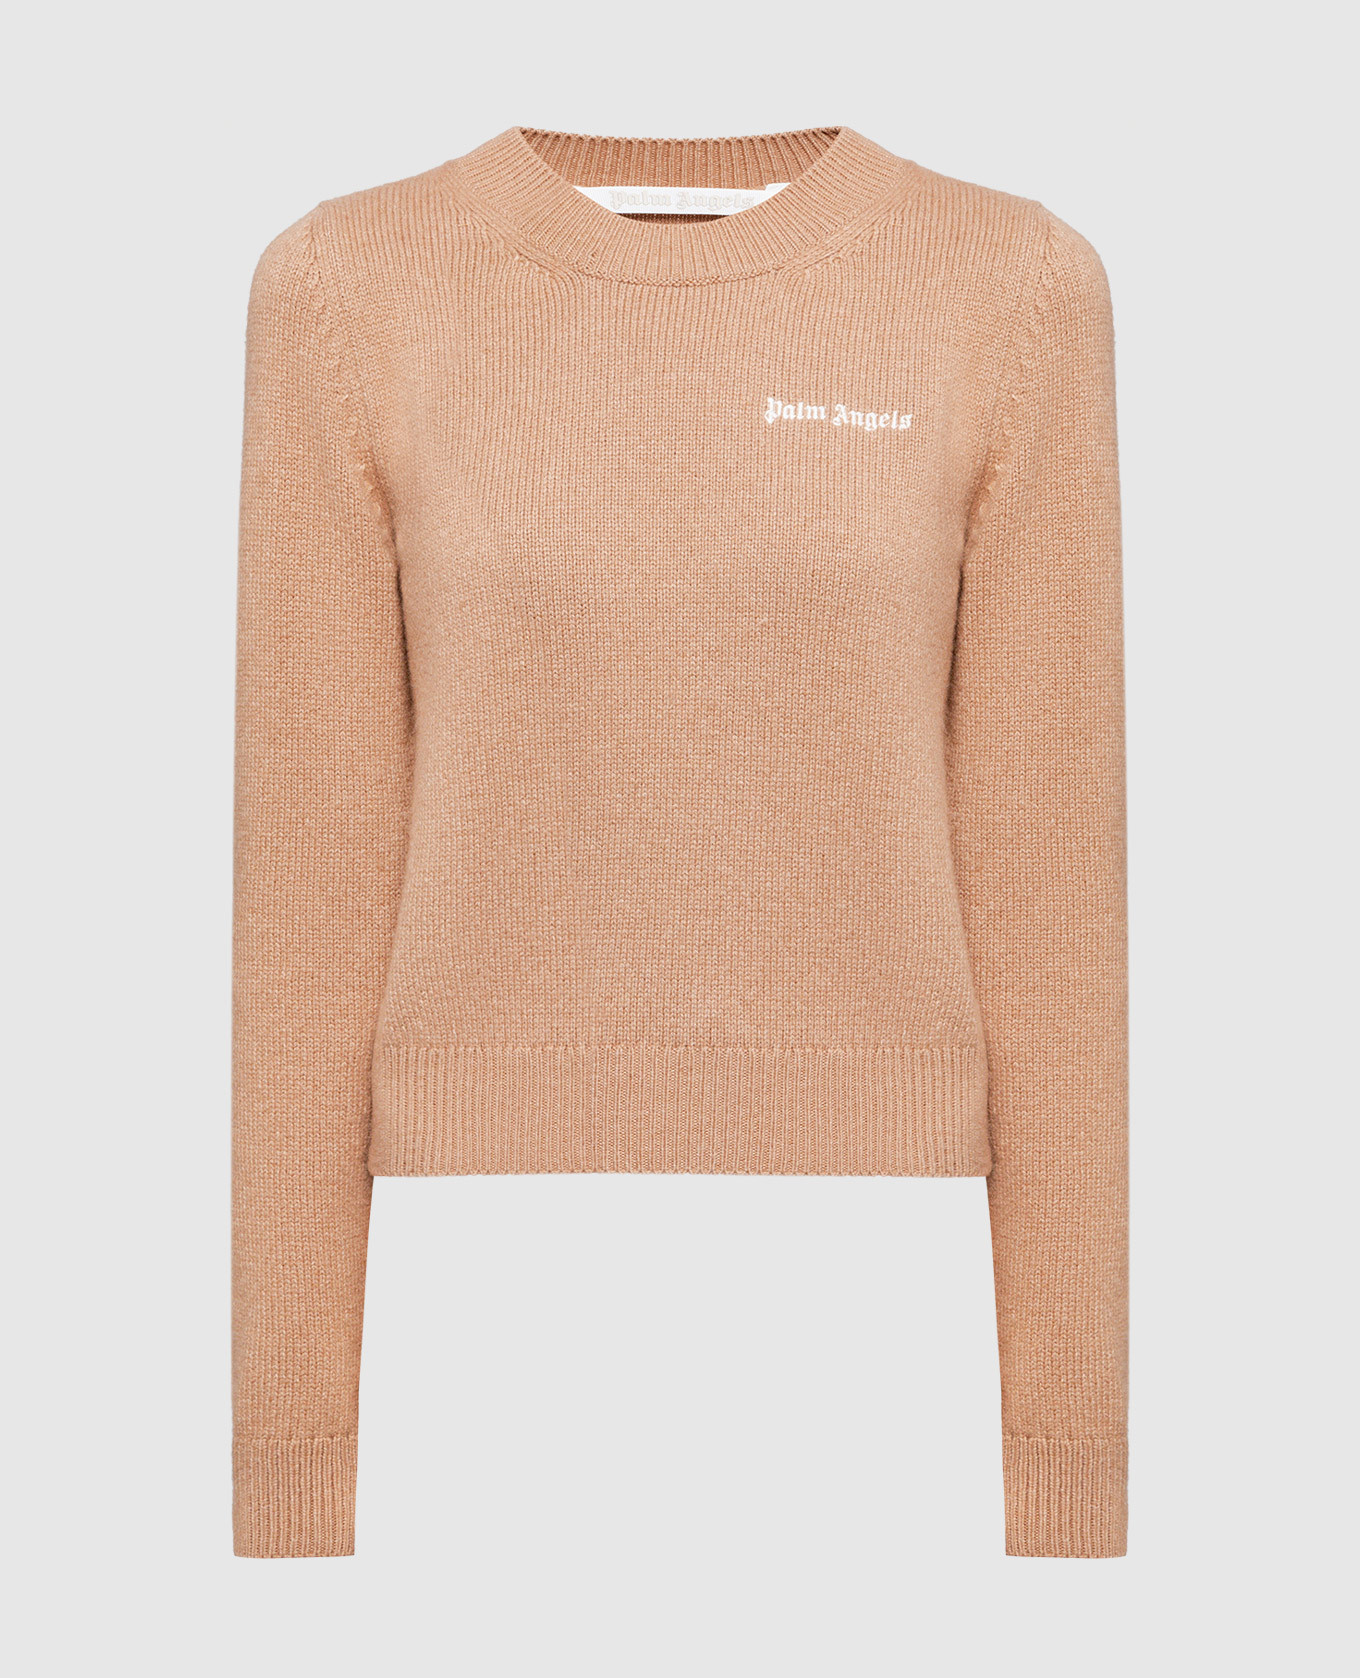 Beige sweater with logo